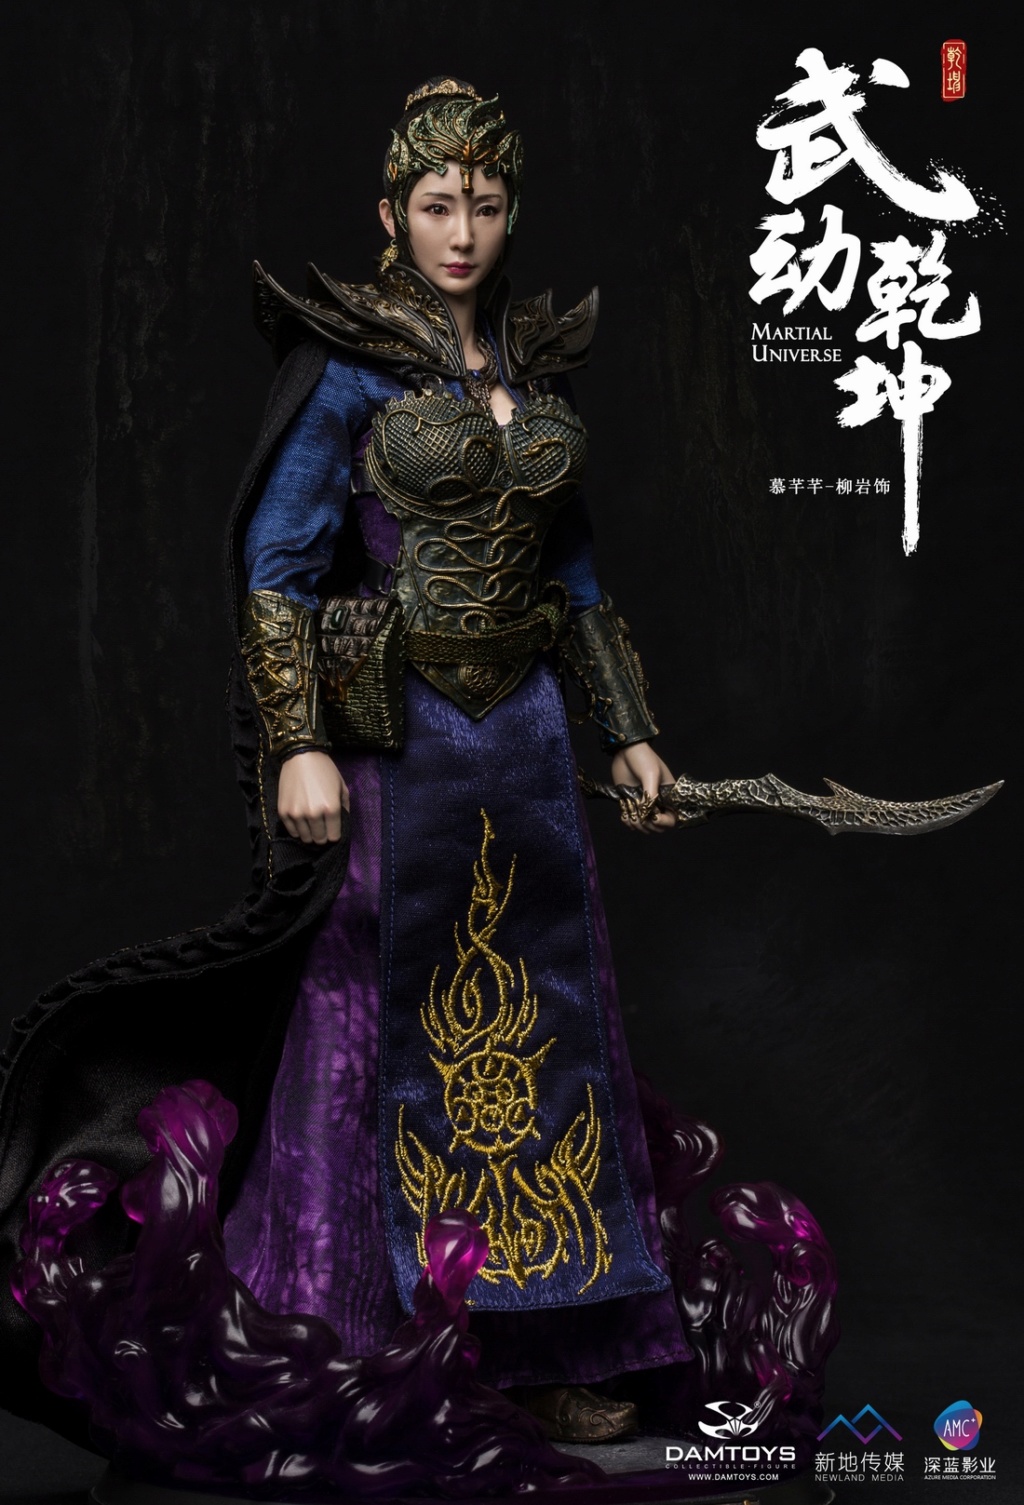 Chinese - NEW PRODUCT: DAMTOYS: 1/6 "The hero of the martial arts and spirits" - Mu Wei (Liu Yan ornaments) movable doll (DMS017) 09551310